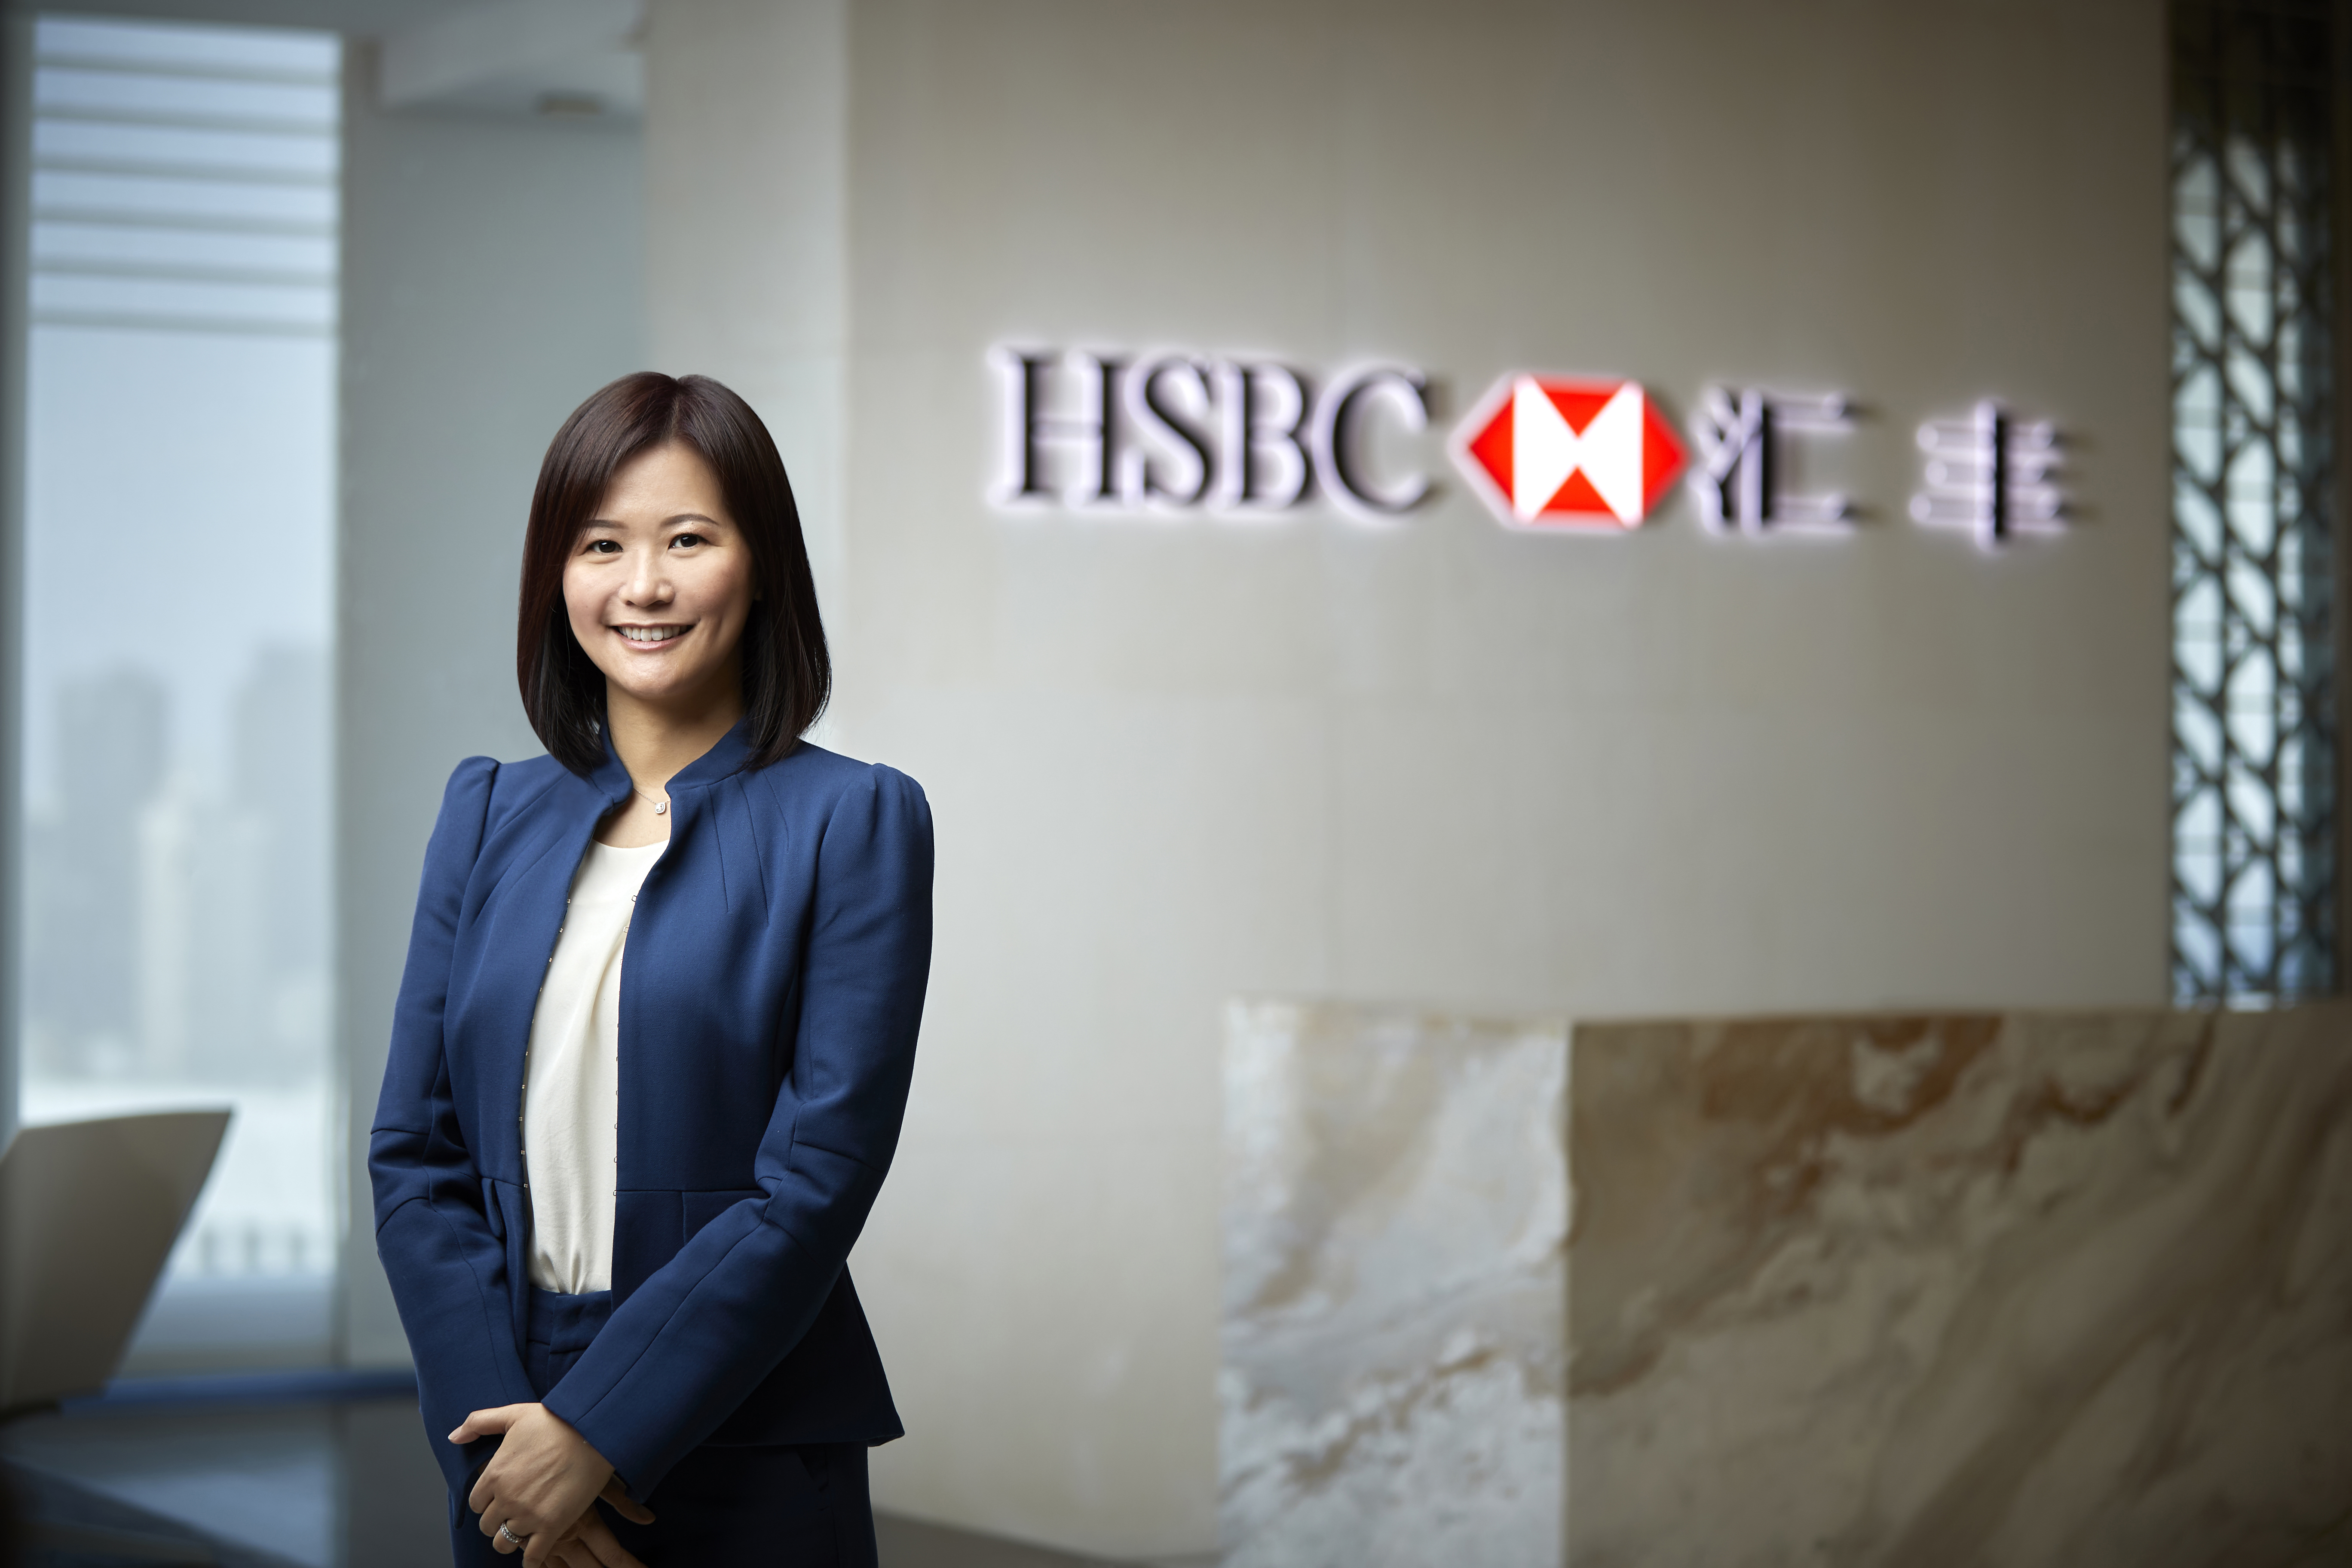 Sophia Chung, HSBC China’s head of securities services